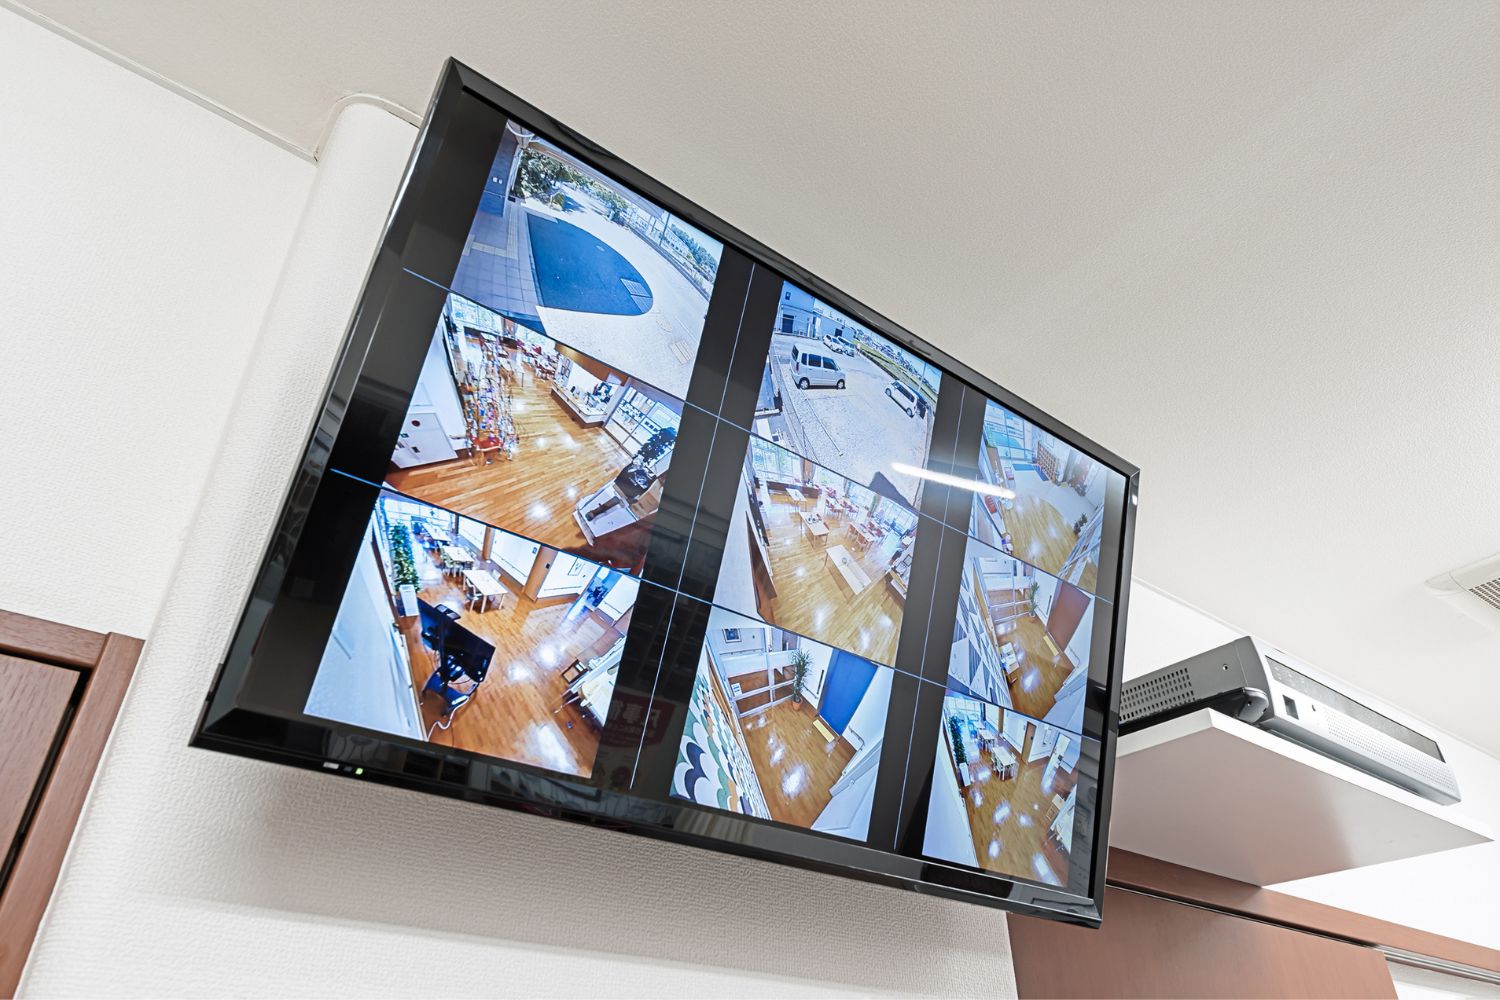 A large-screen TV displays feeds from nine security cameras positioned around a home.